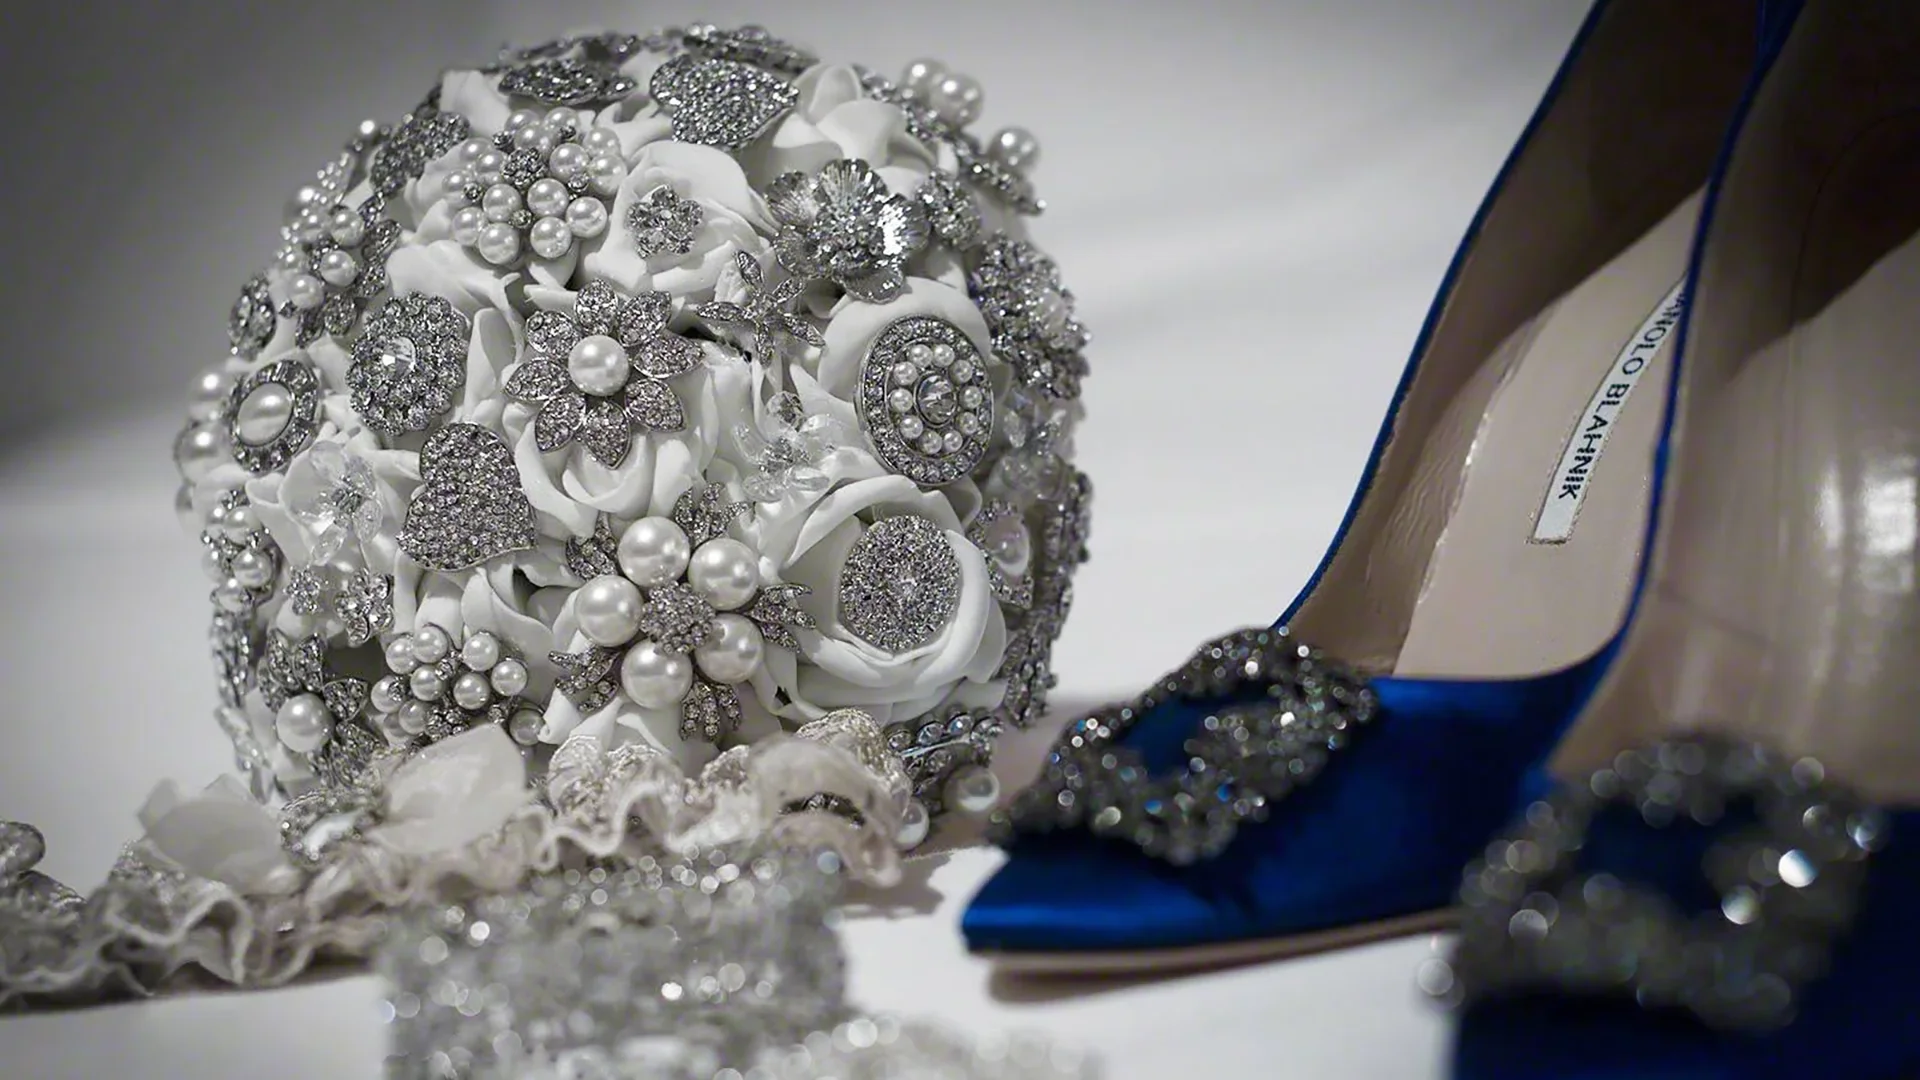 Bouquet of silver broaches and Manolo Blahnik shoes